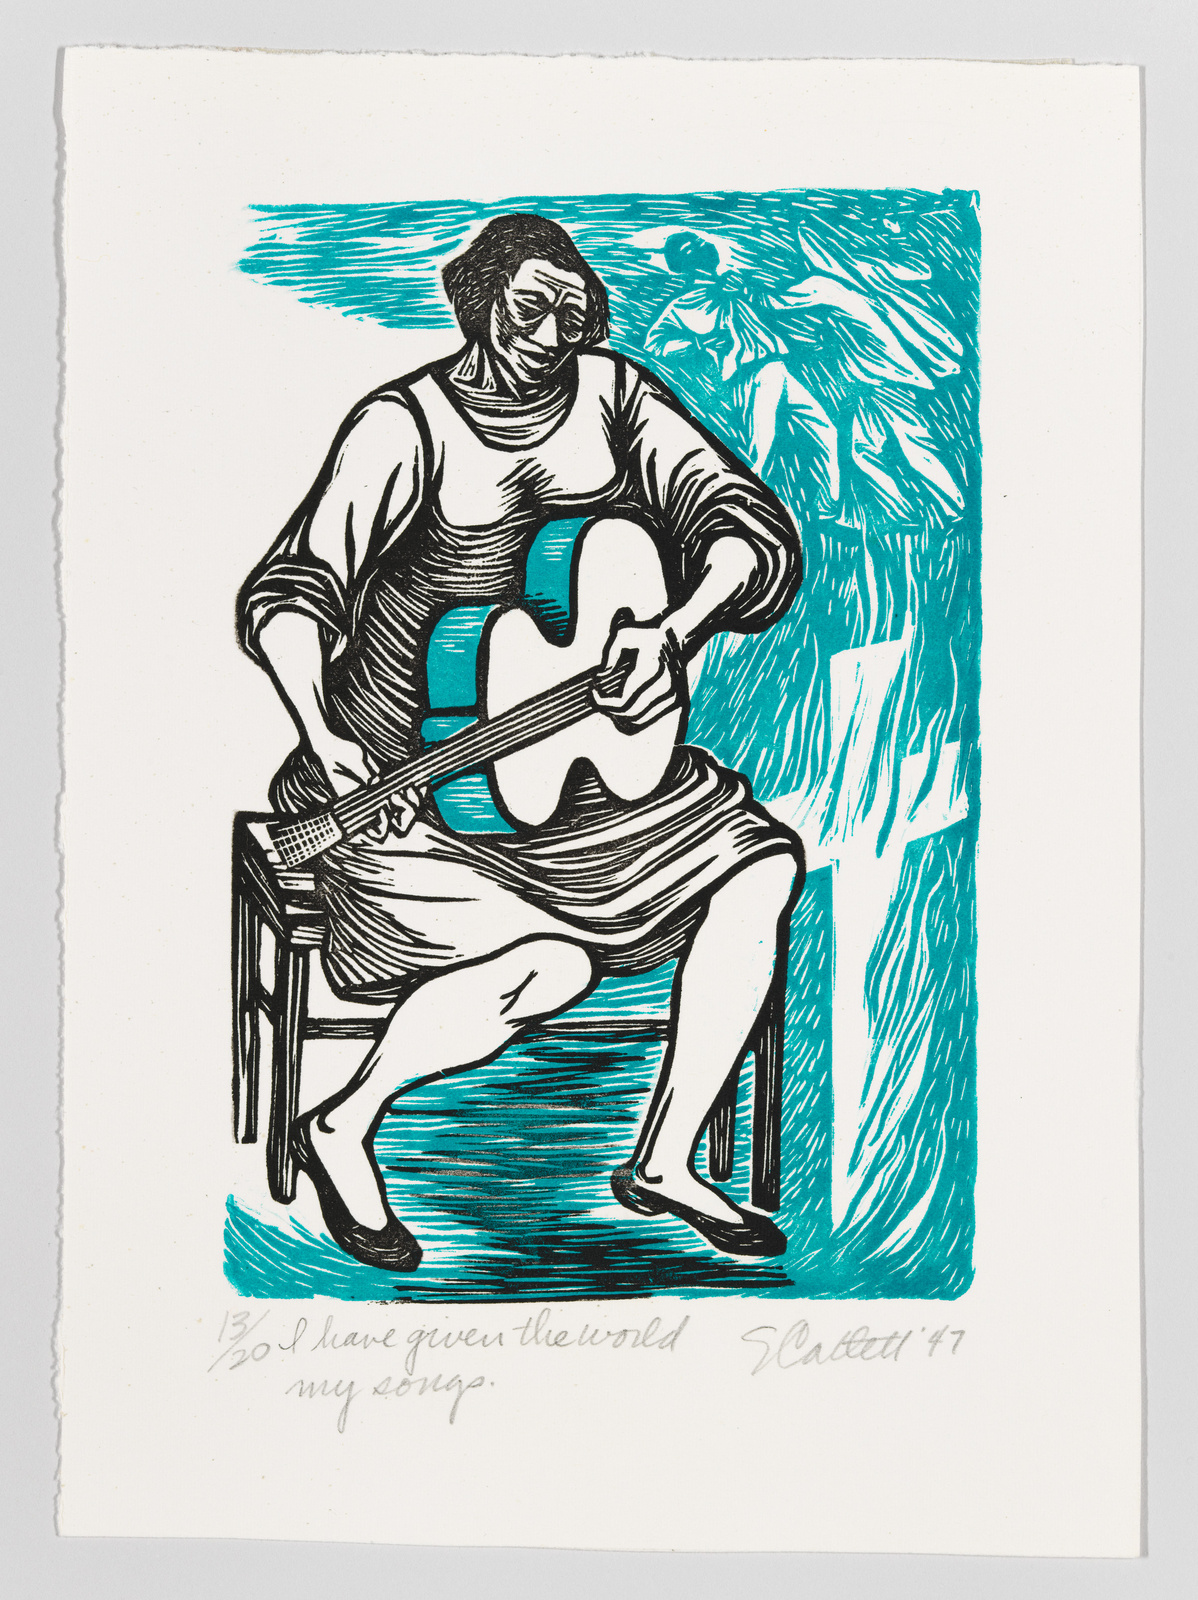 A Black woman sitting on a chair and playing guitar, printed in black, with teal depictions of violence against a Black man.